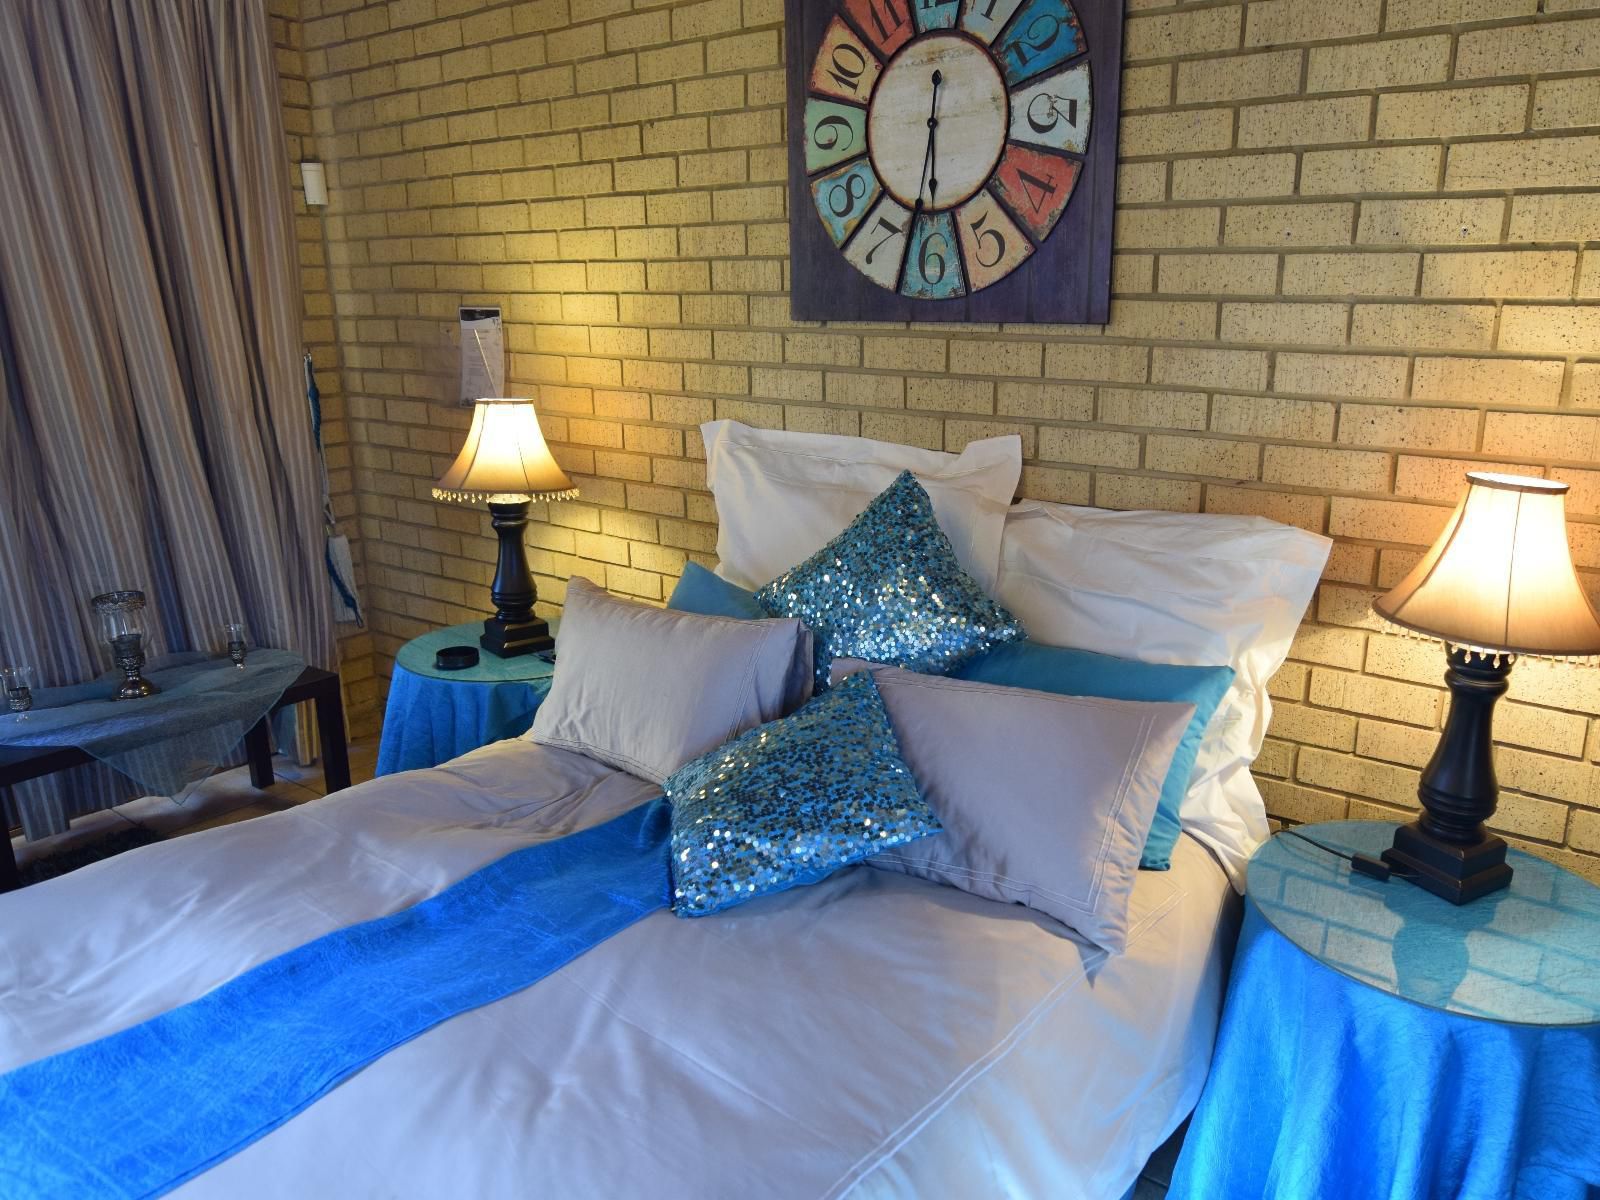 Accommodation At Thabong Venue Brakpan Johannesburg Gauteng South Africa Complementary Colors, Bedroom